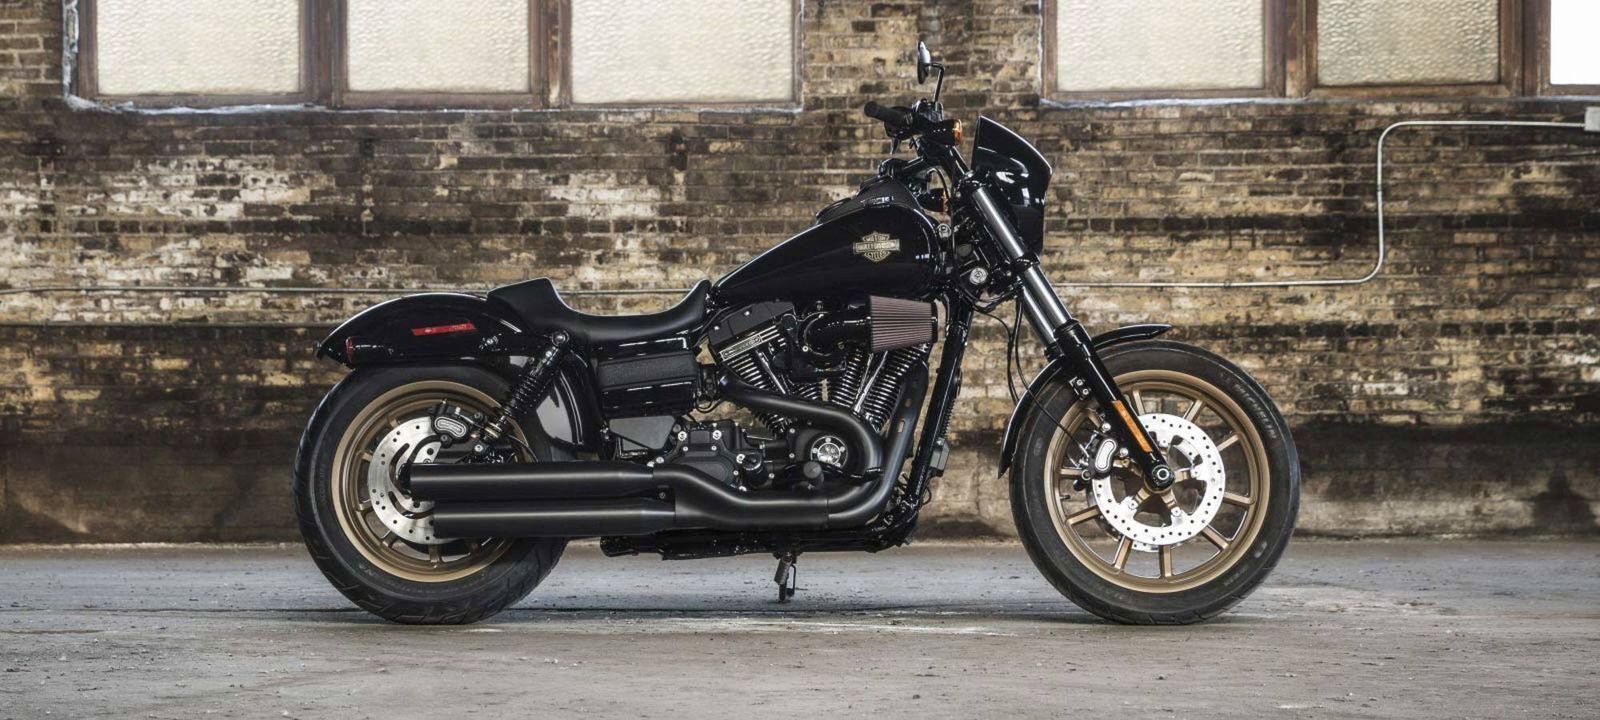 10 Reasons Why Every Biker Should Ride One Of The 2022 Harley